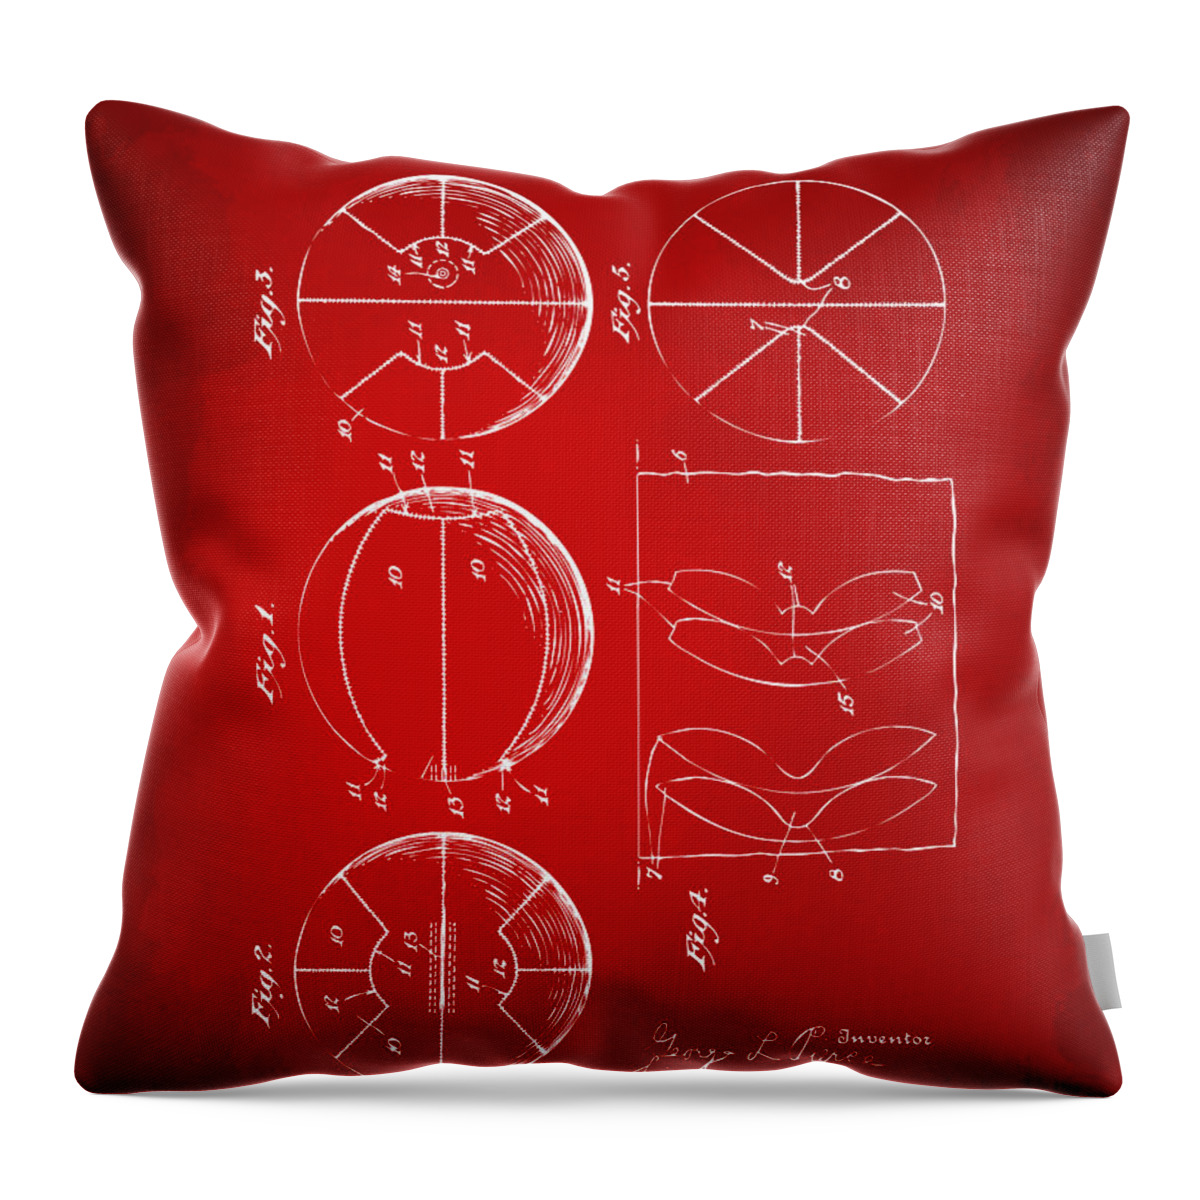 Basketball Throw Pillow featuring the digital art 1929 Basketball Patent Artwork - Red by Nikki Marie Smith